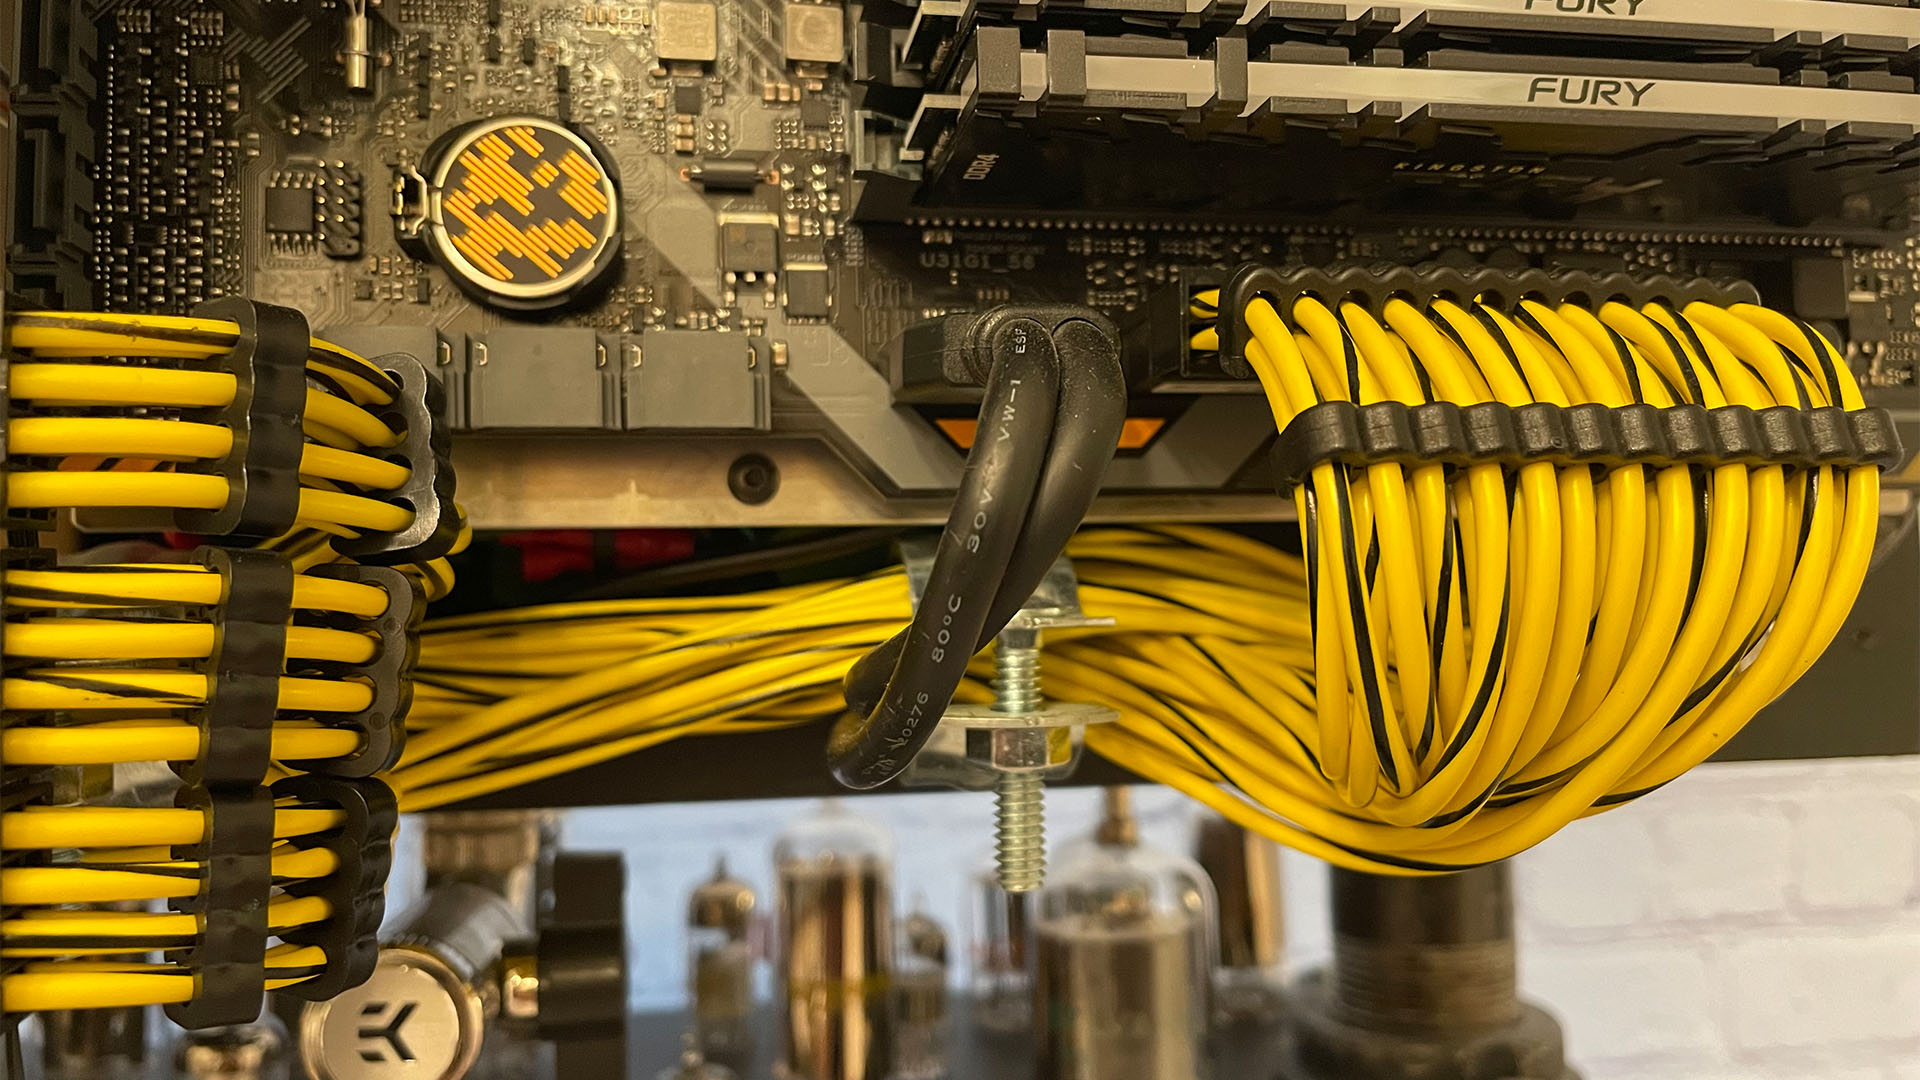 The yellow and black custom made cables on the steampunk gaming PC